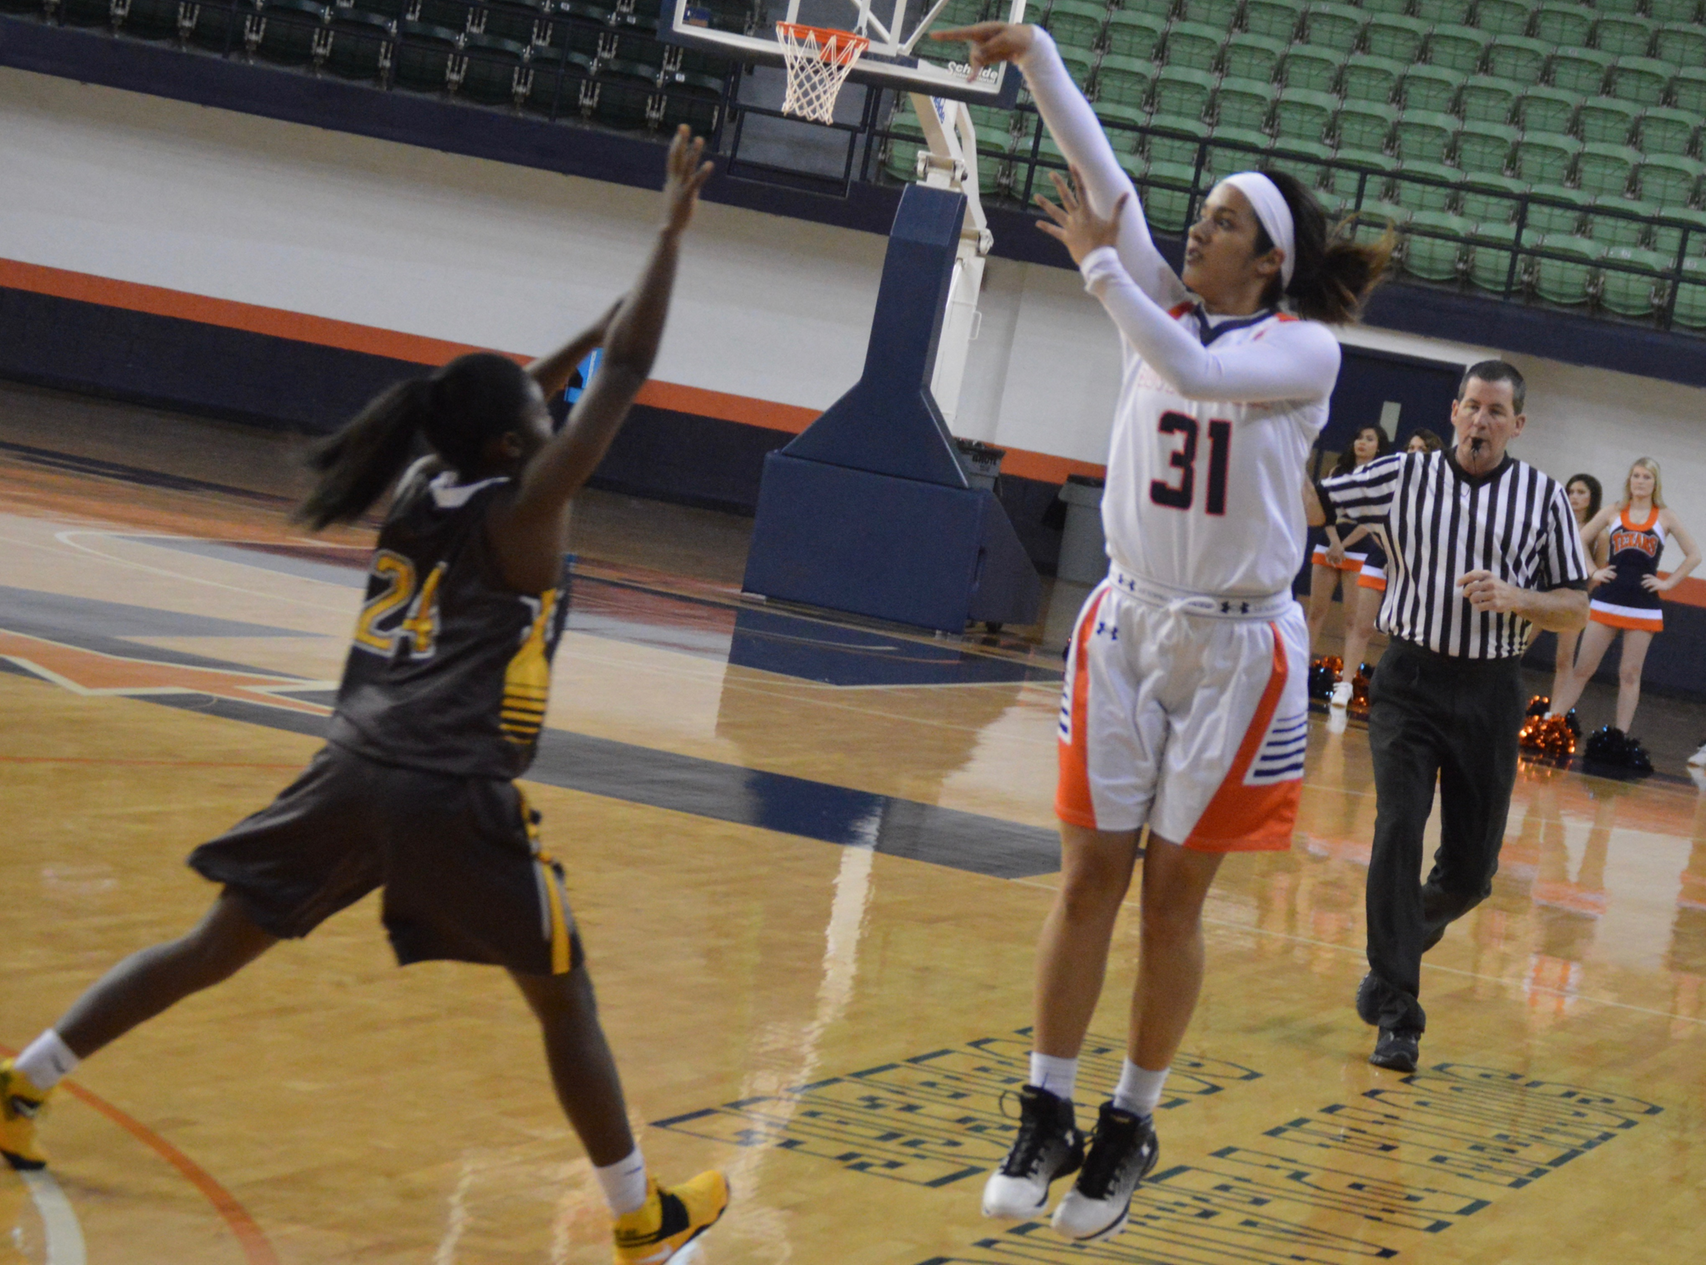 #9 Lady Texans use strong second half to down Garden City 69-50 on Sunday